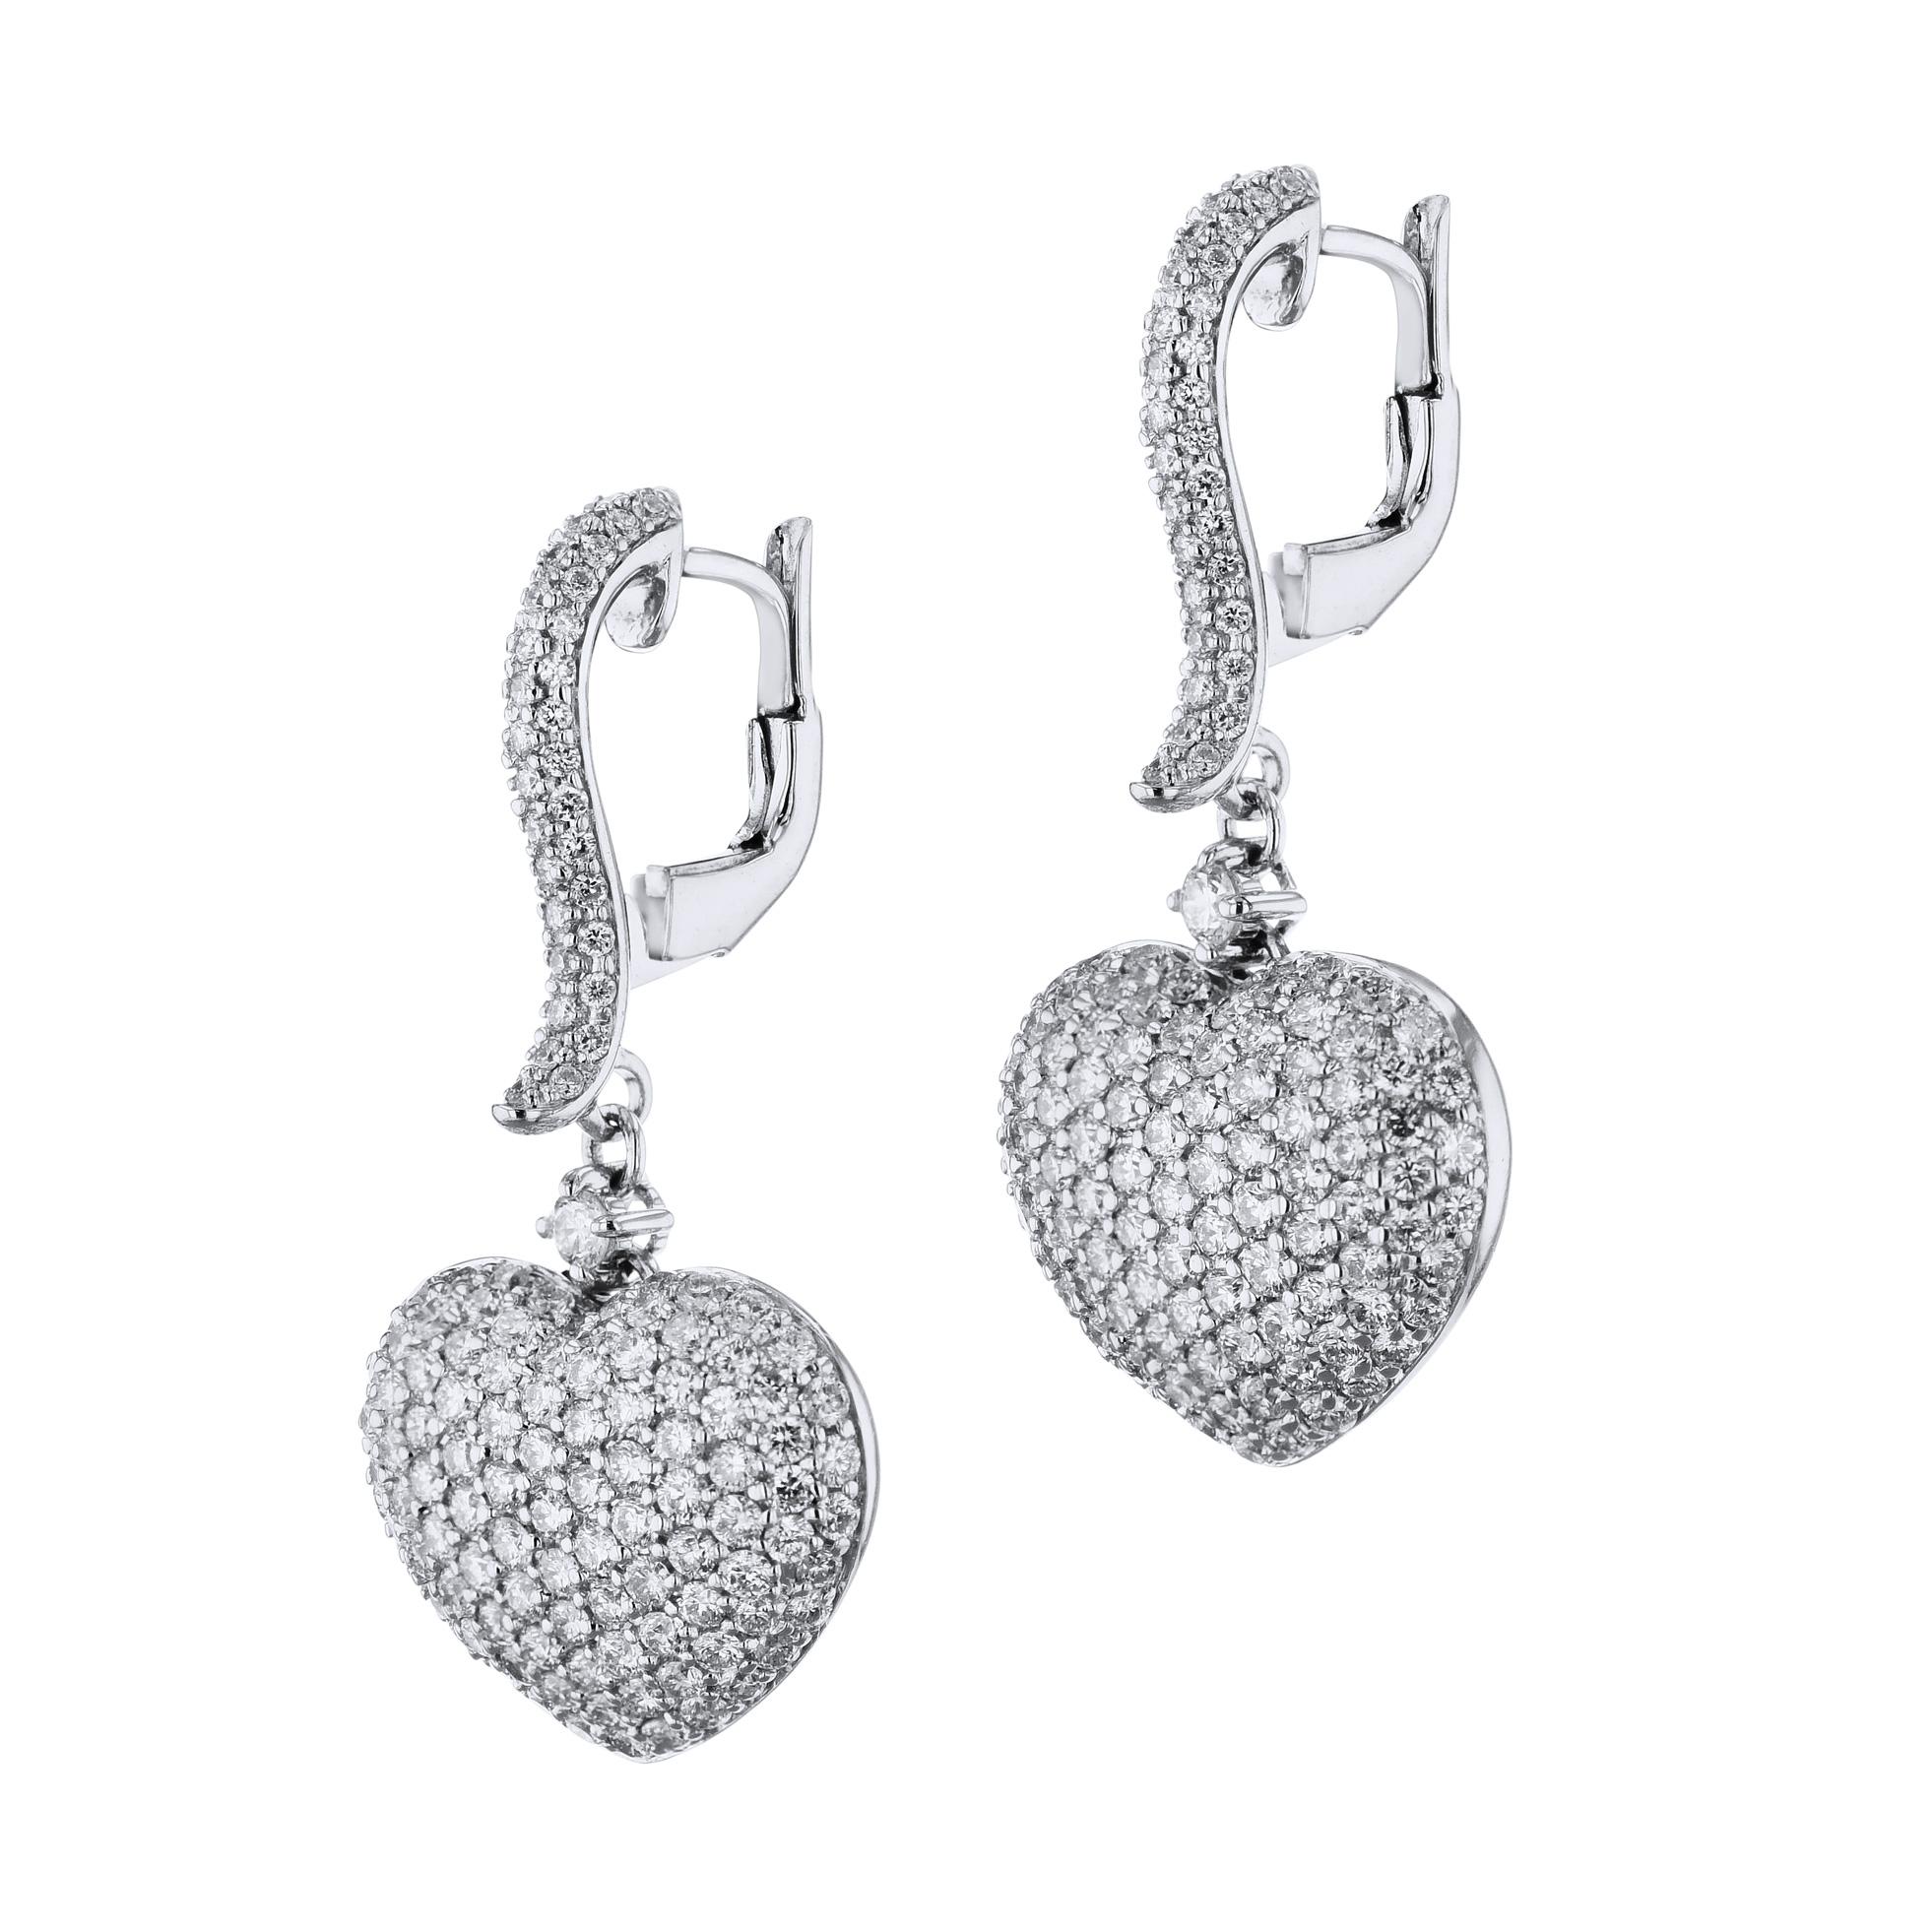  Heart Shaped Diamond Pave Drop Earrings White Gold  In New Condition For Sale In Miami, FL